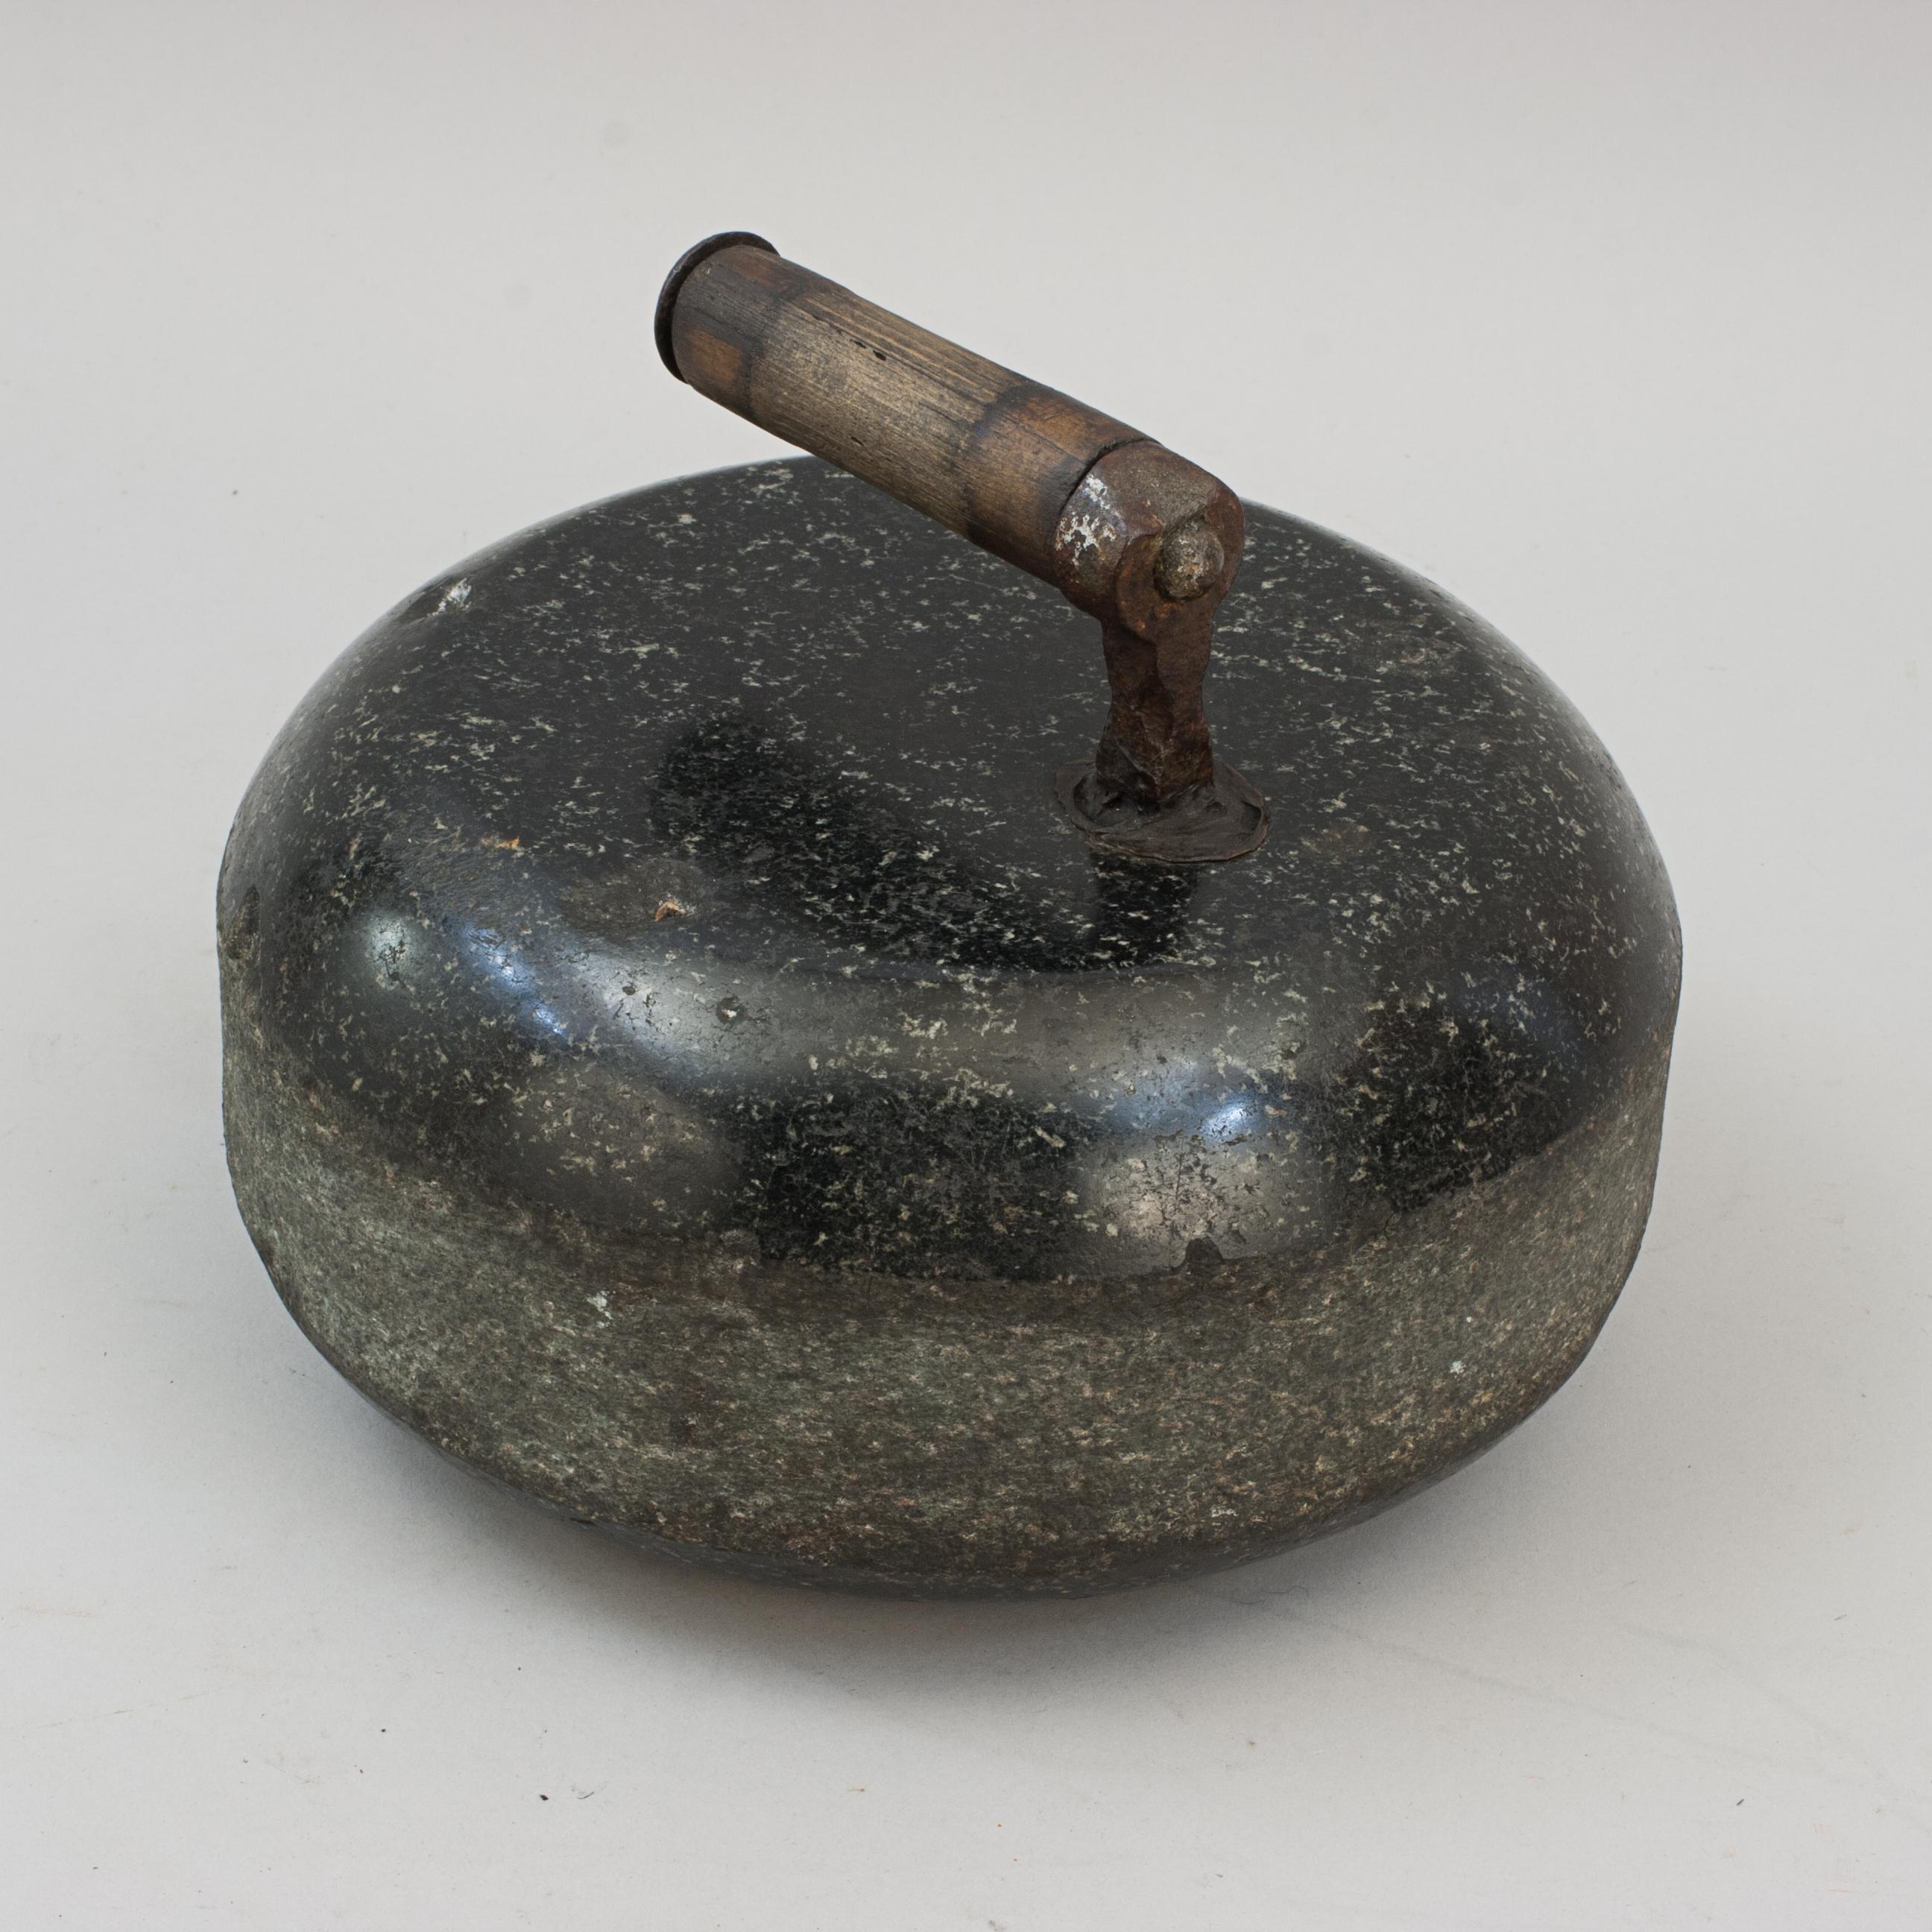 Antique Granite Curling Stone.
A late 19th or early 20th century single-soled curling stone with a metal and wood handle. The handle is permanently fixed with lead into a hole that is bored into the top of the stone.

The stone is 25 cm in diameter